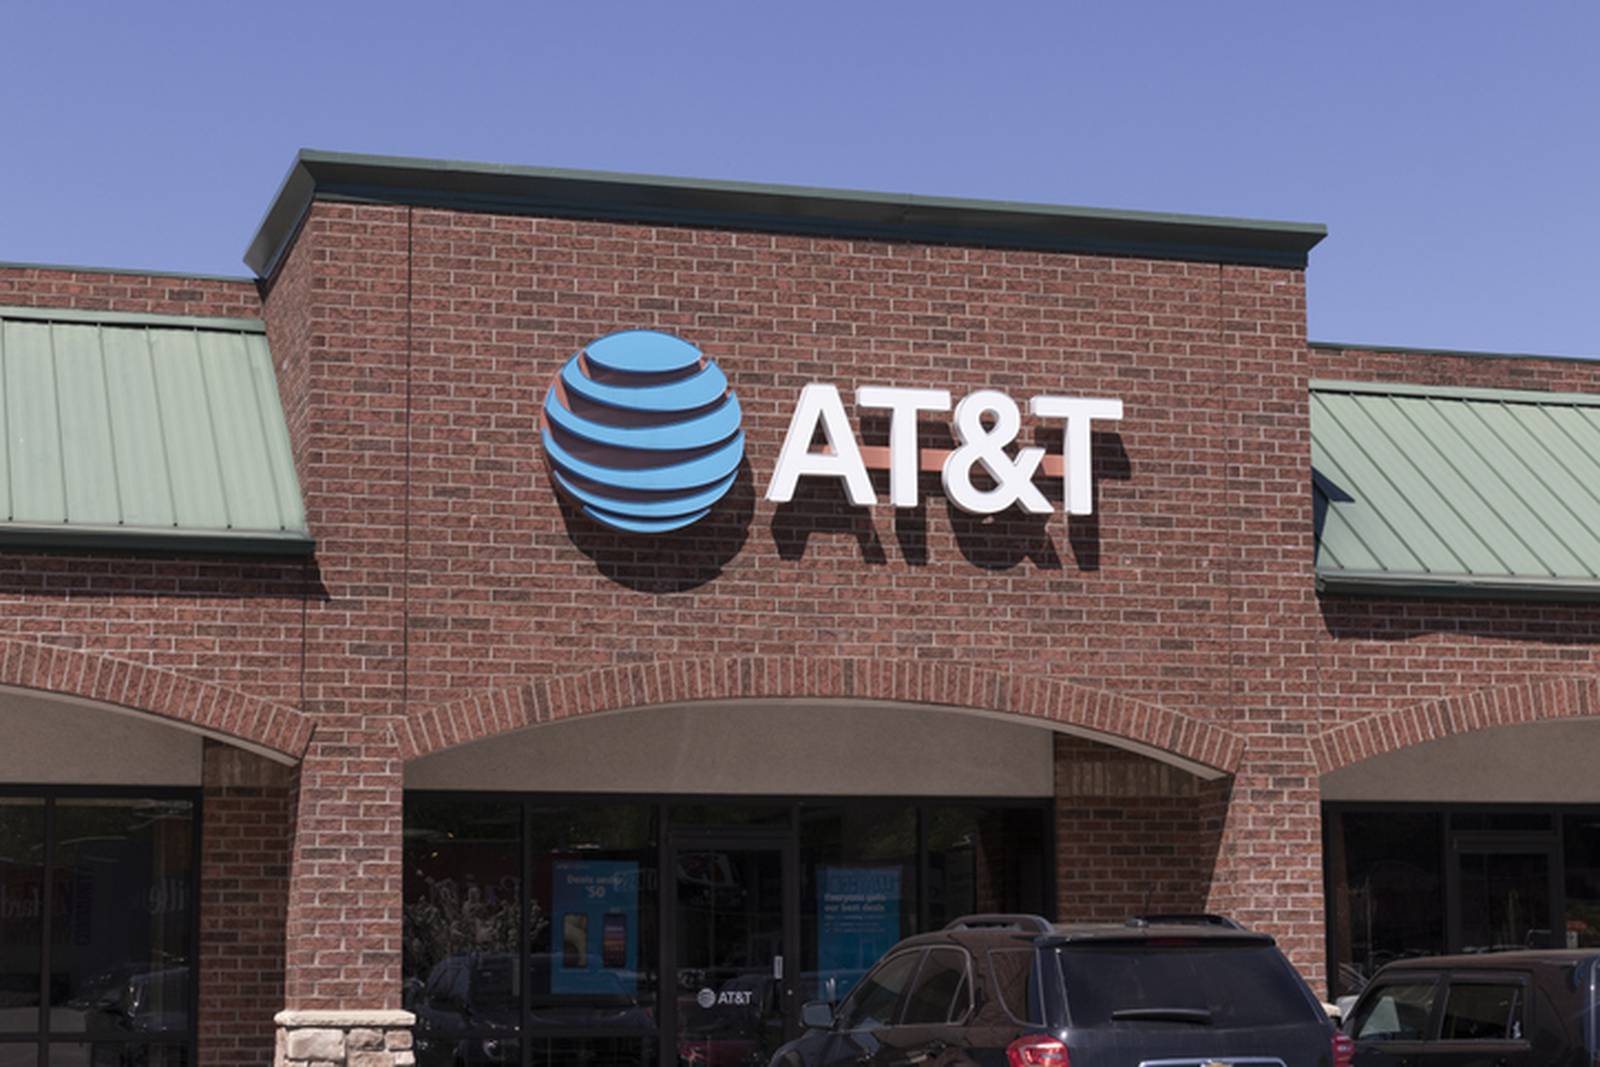 AT&T outage Company says 100 of its network has been restored after